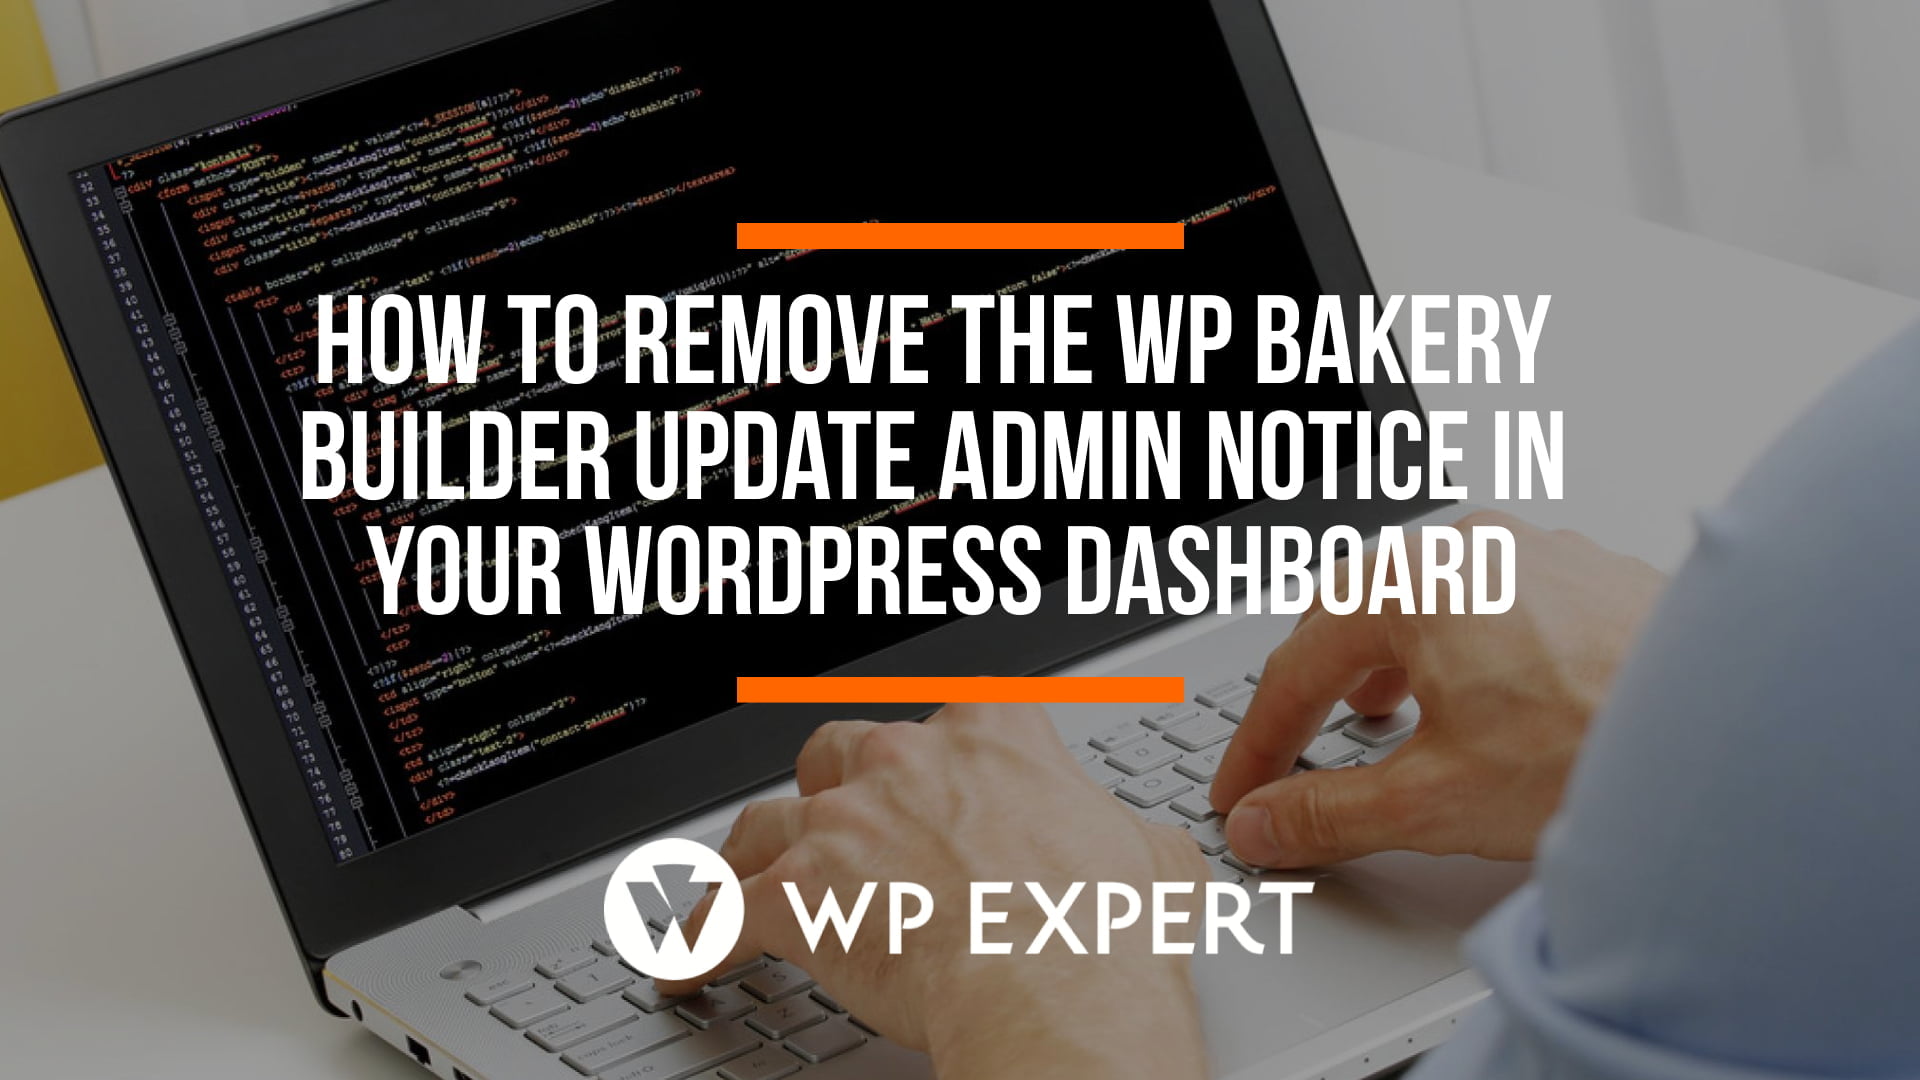 How to remove the WP Bakery Builder Update admin notice in WordPress dashboard